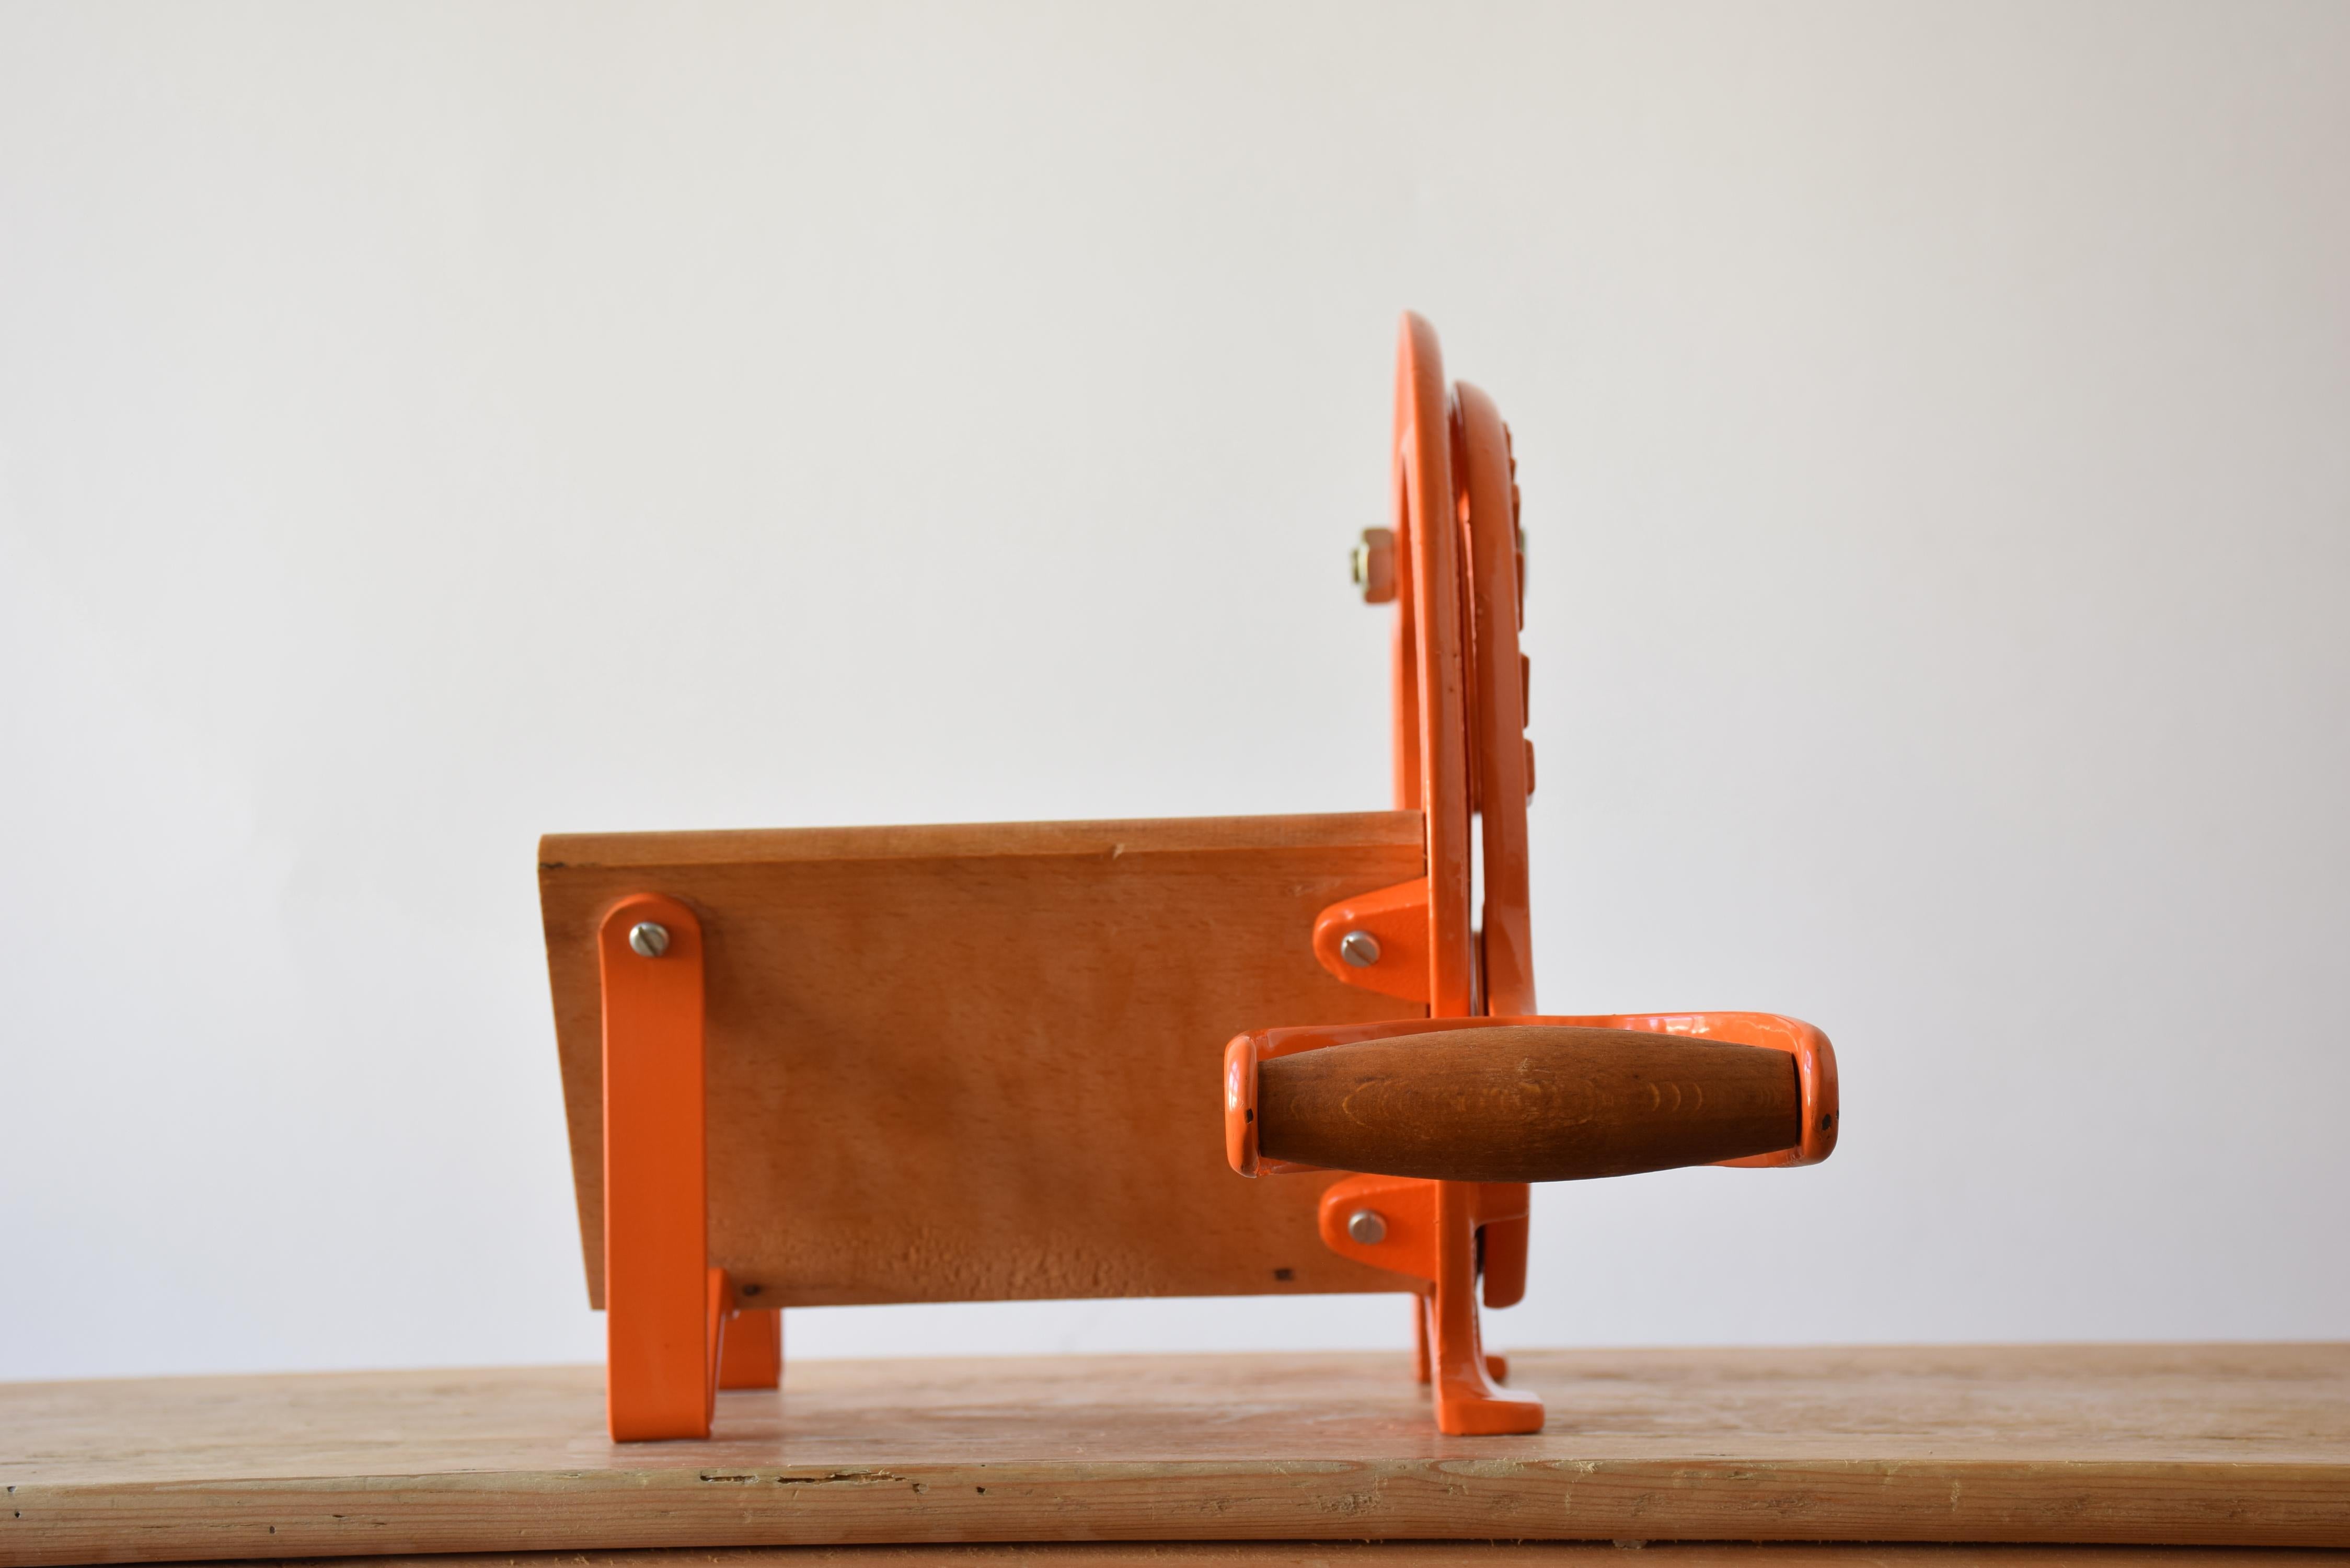 This iconic Danish bread slicer was produced by Raadvad in Denmark, circa 1970s-1980s. It comes with the original orange paint. The bread slicer is fully functional for slicing bread, especially black bread and firm bread and is at the same time